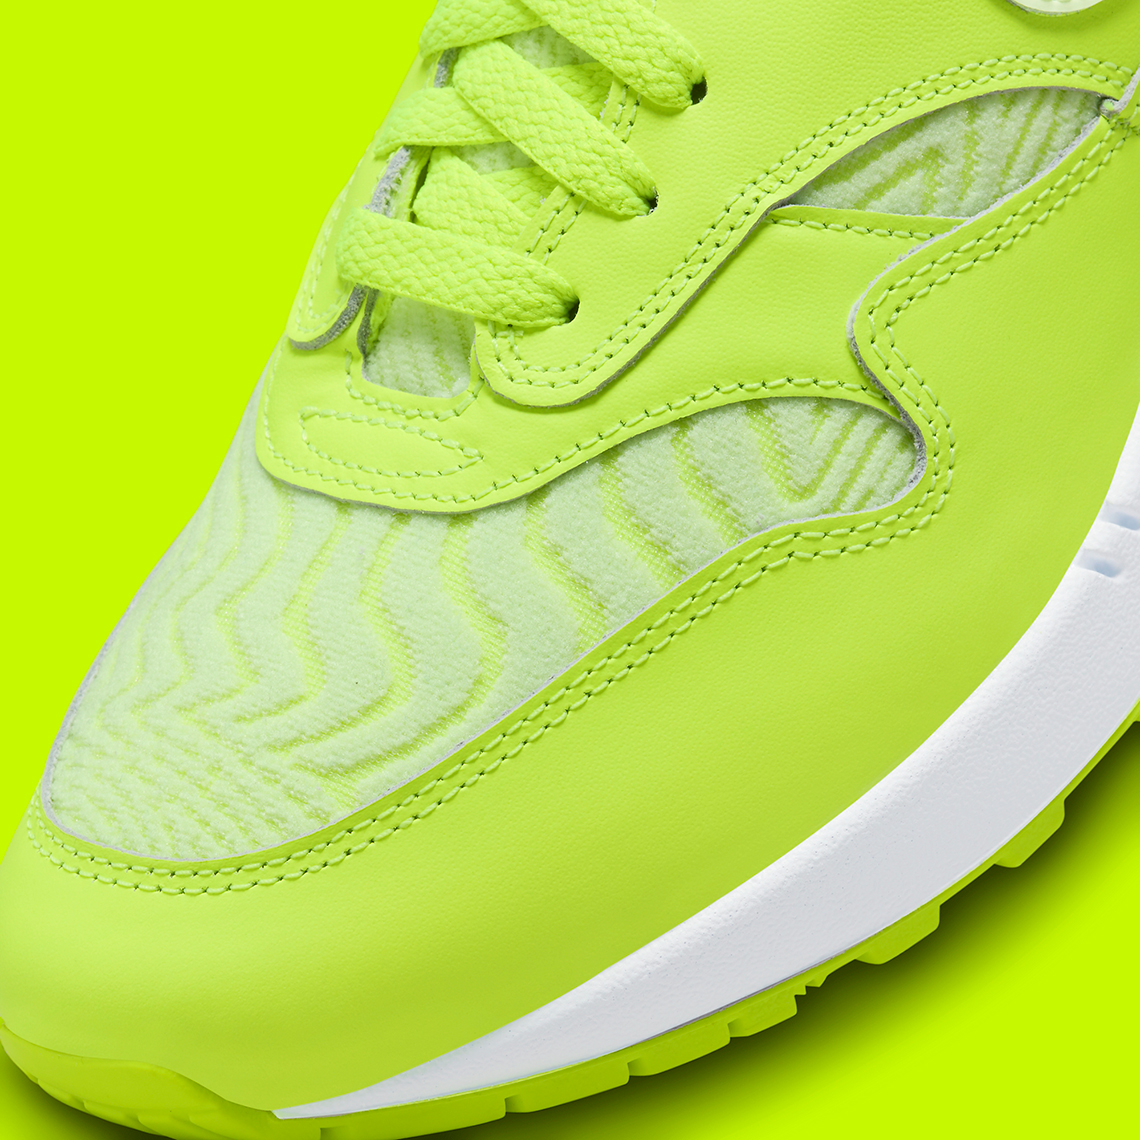 Nike Air Max 1 Volt Topography Fn6832 702 8